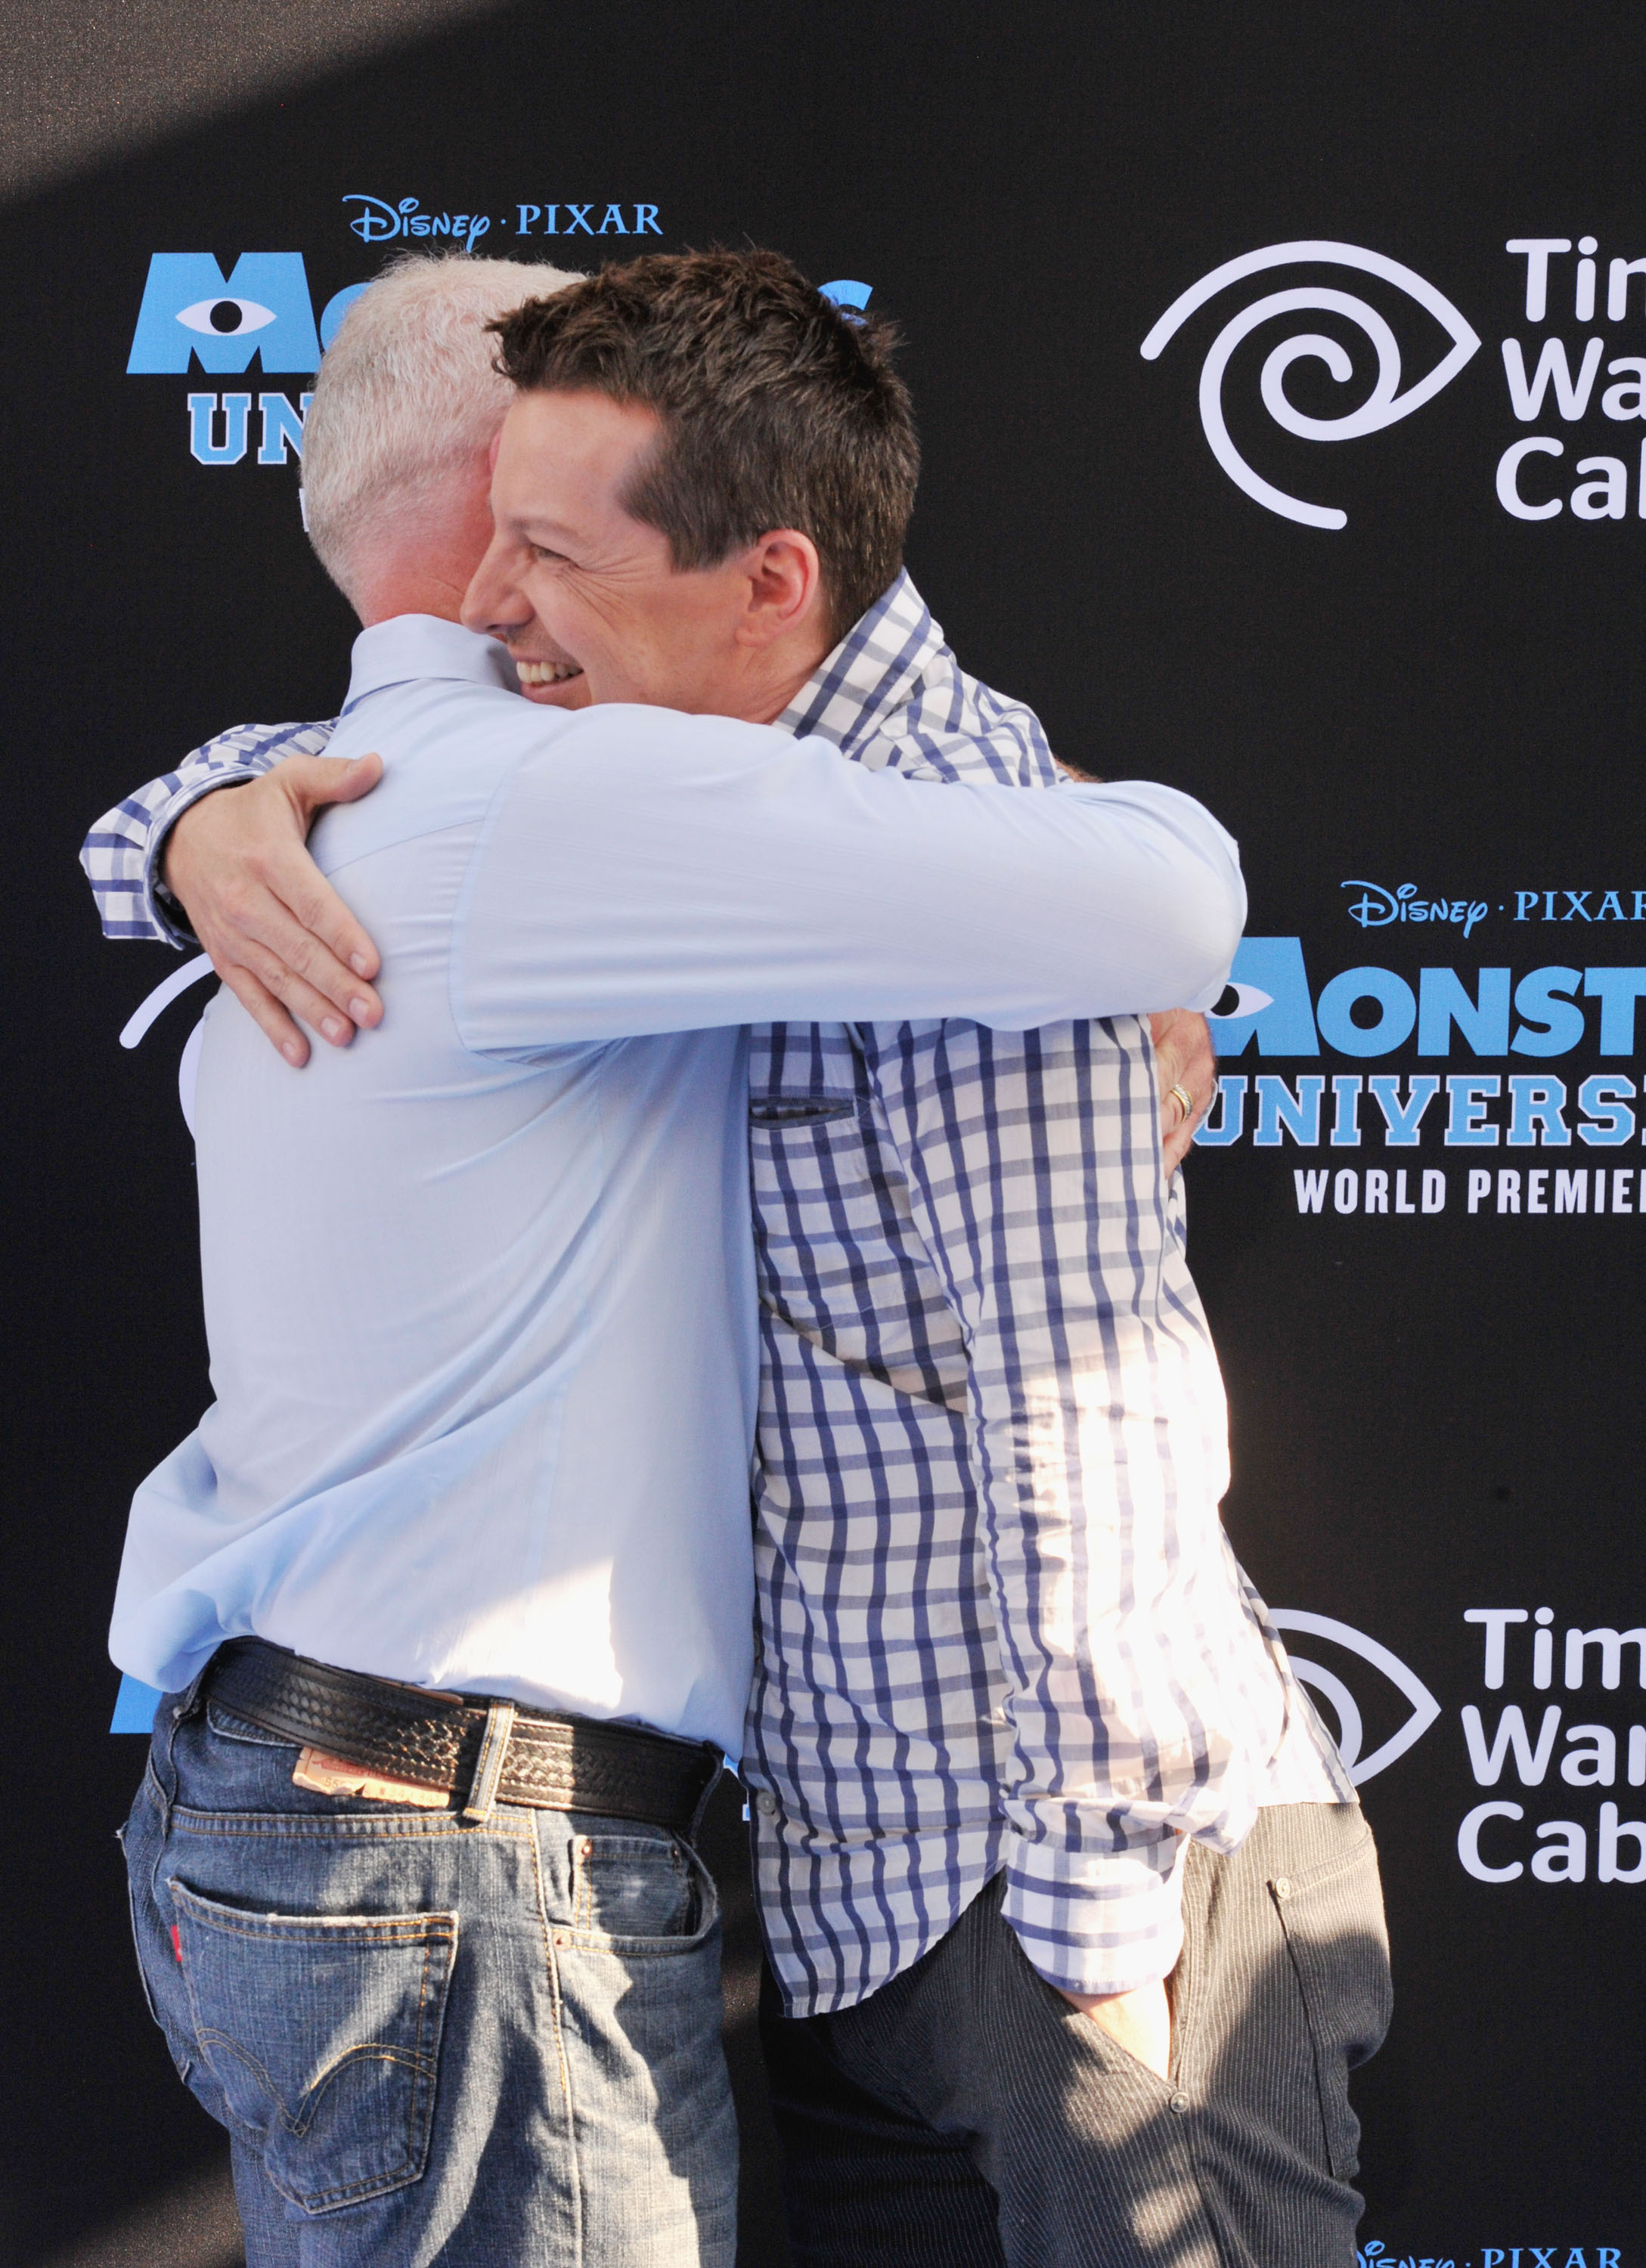 The actor and Sean Hayes during the world premiere of "Monsters University" at the El Capitan Theatre on June 17, 2013, in Hollywood, California. | Source: Getty Images